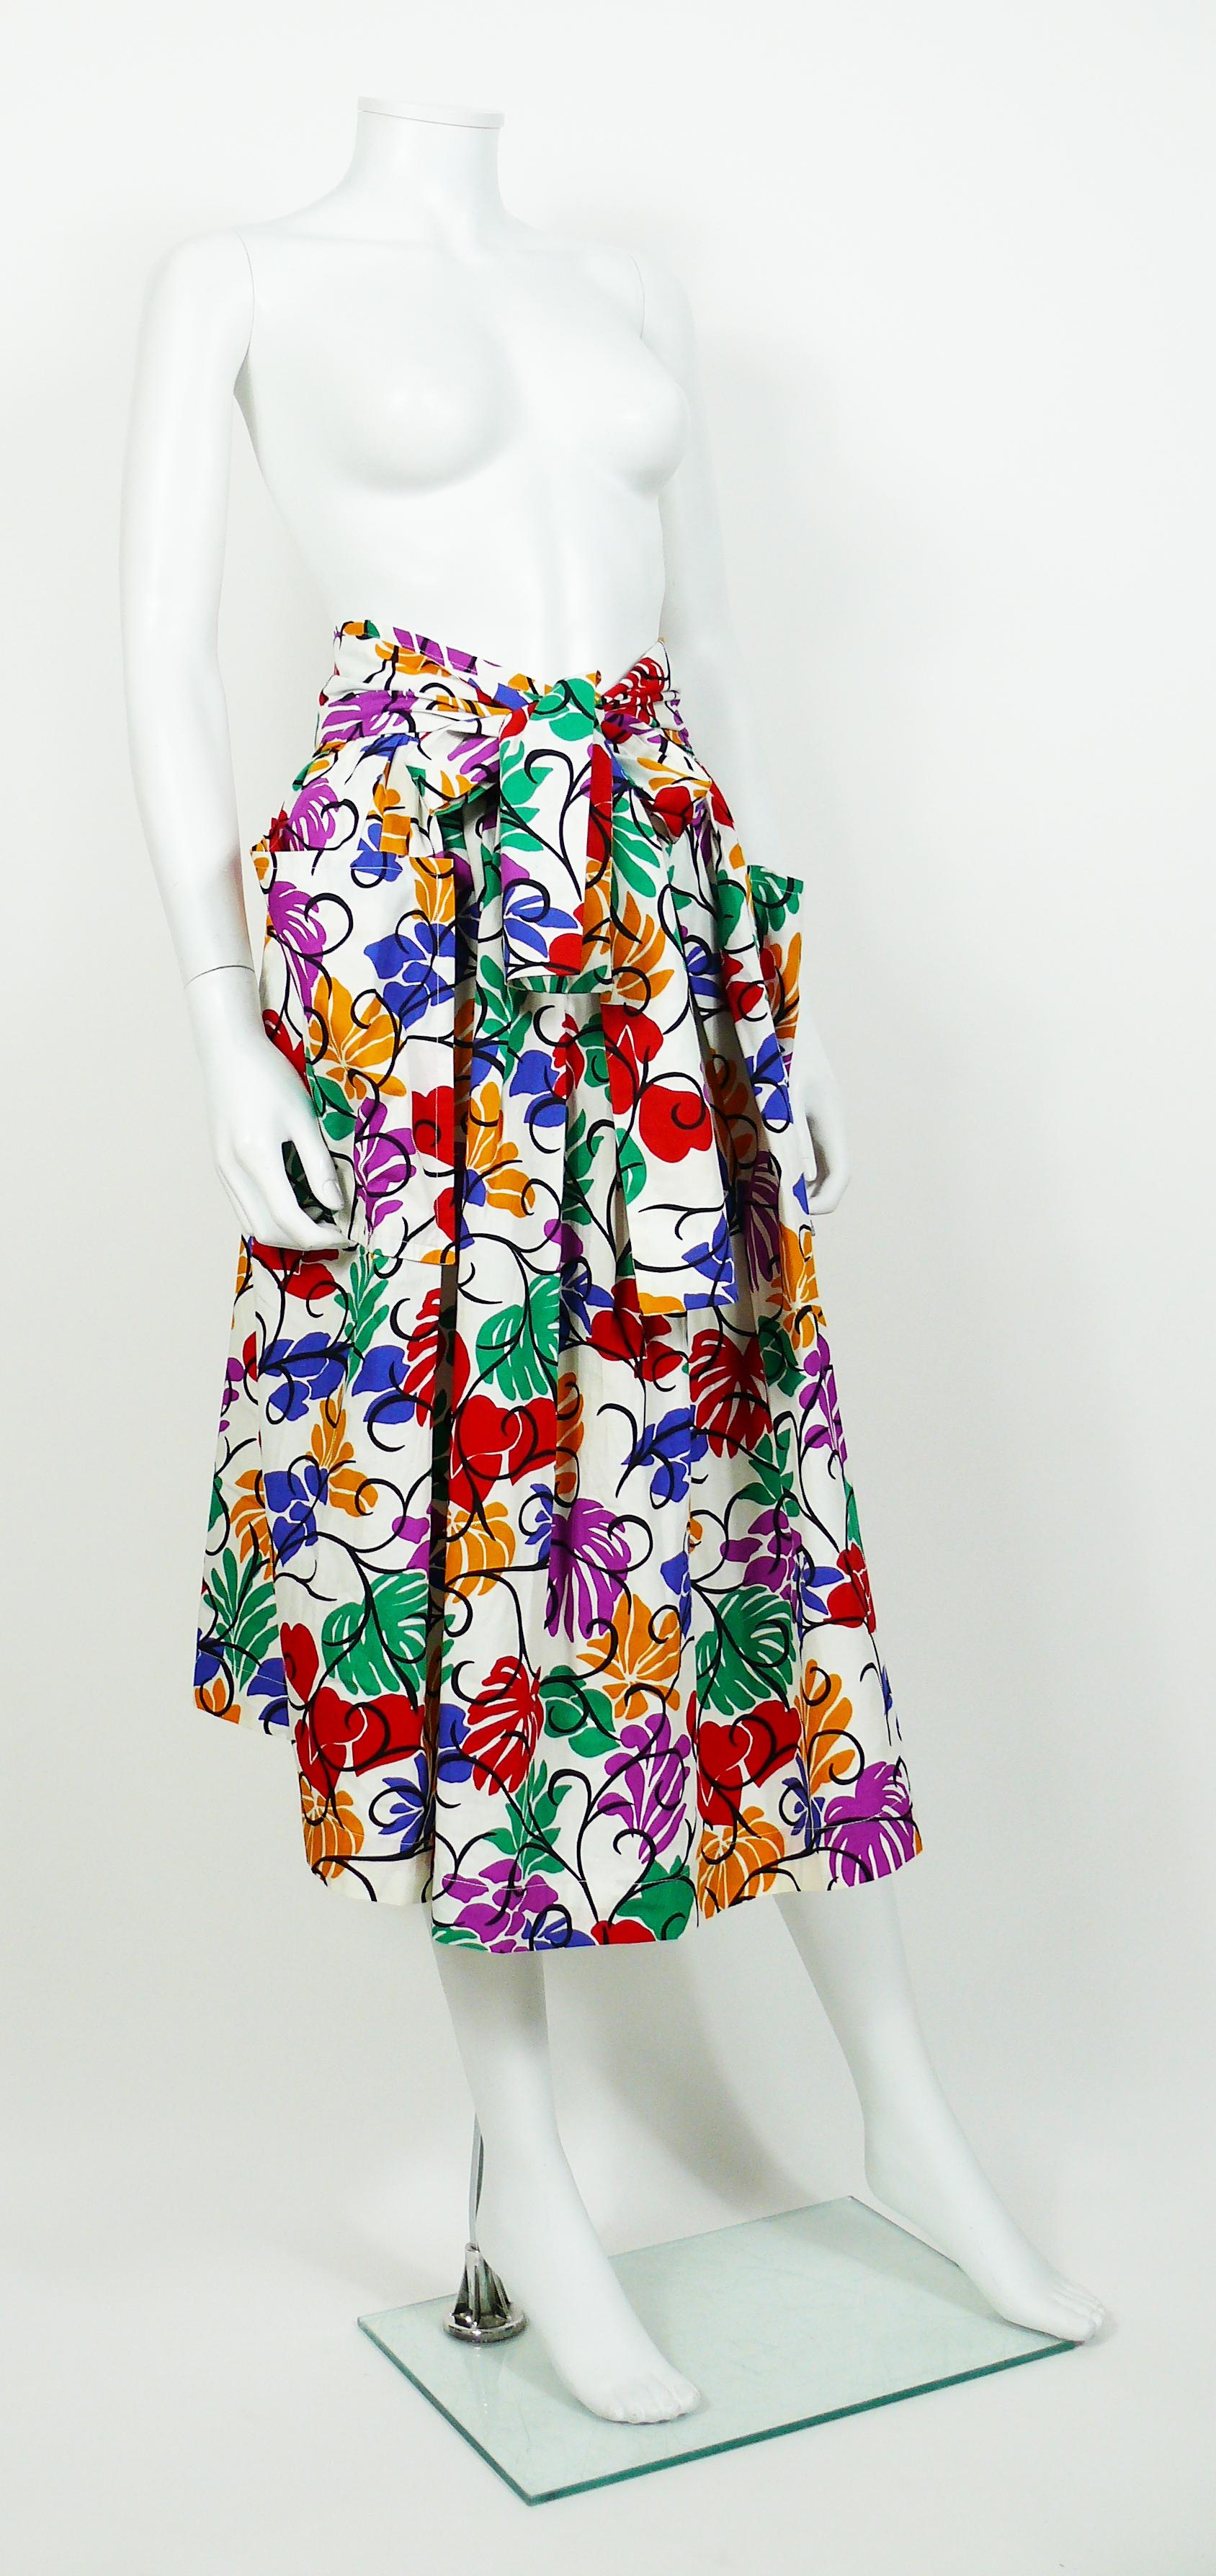 YVES SAINT LAURENT RIVE GAUCHE vintage skirt featuring a multicolored floral and heart print inspired by the cut-out artworks of HENRI MATISSE.

This skirt features :
- White cotton fabric with a bold multicolored all over opulent print.
-